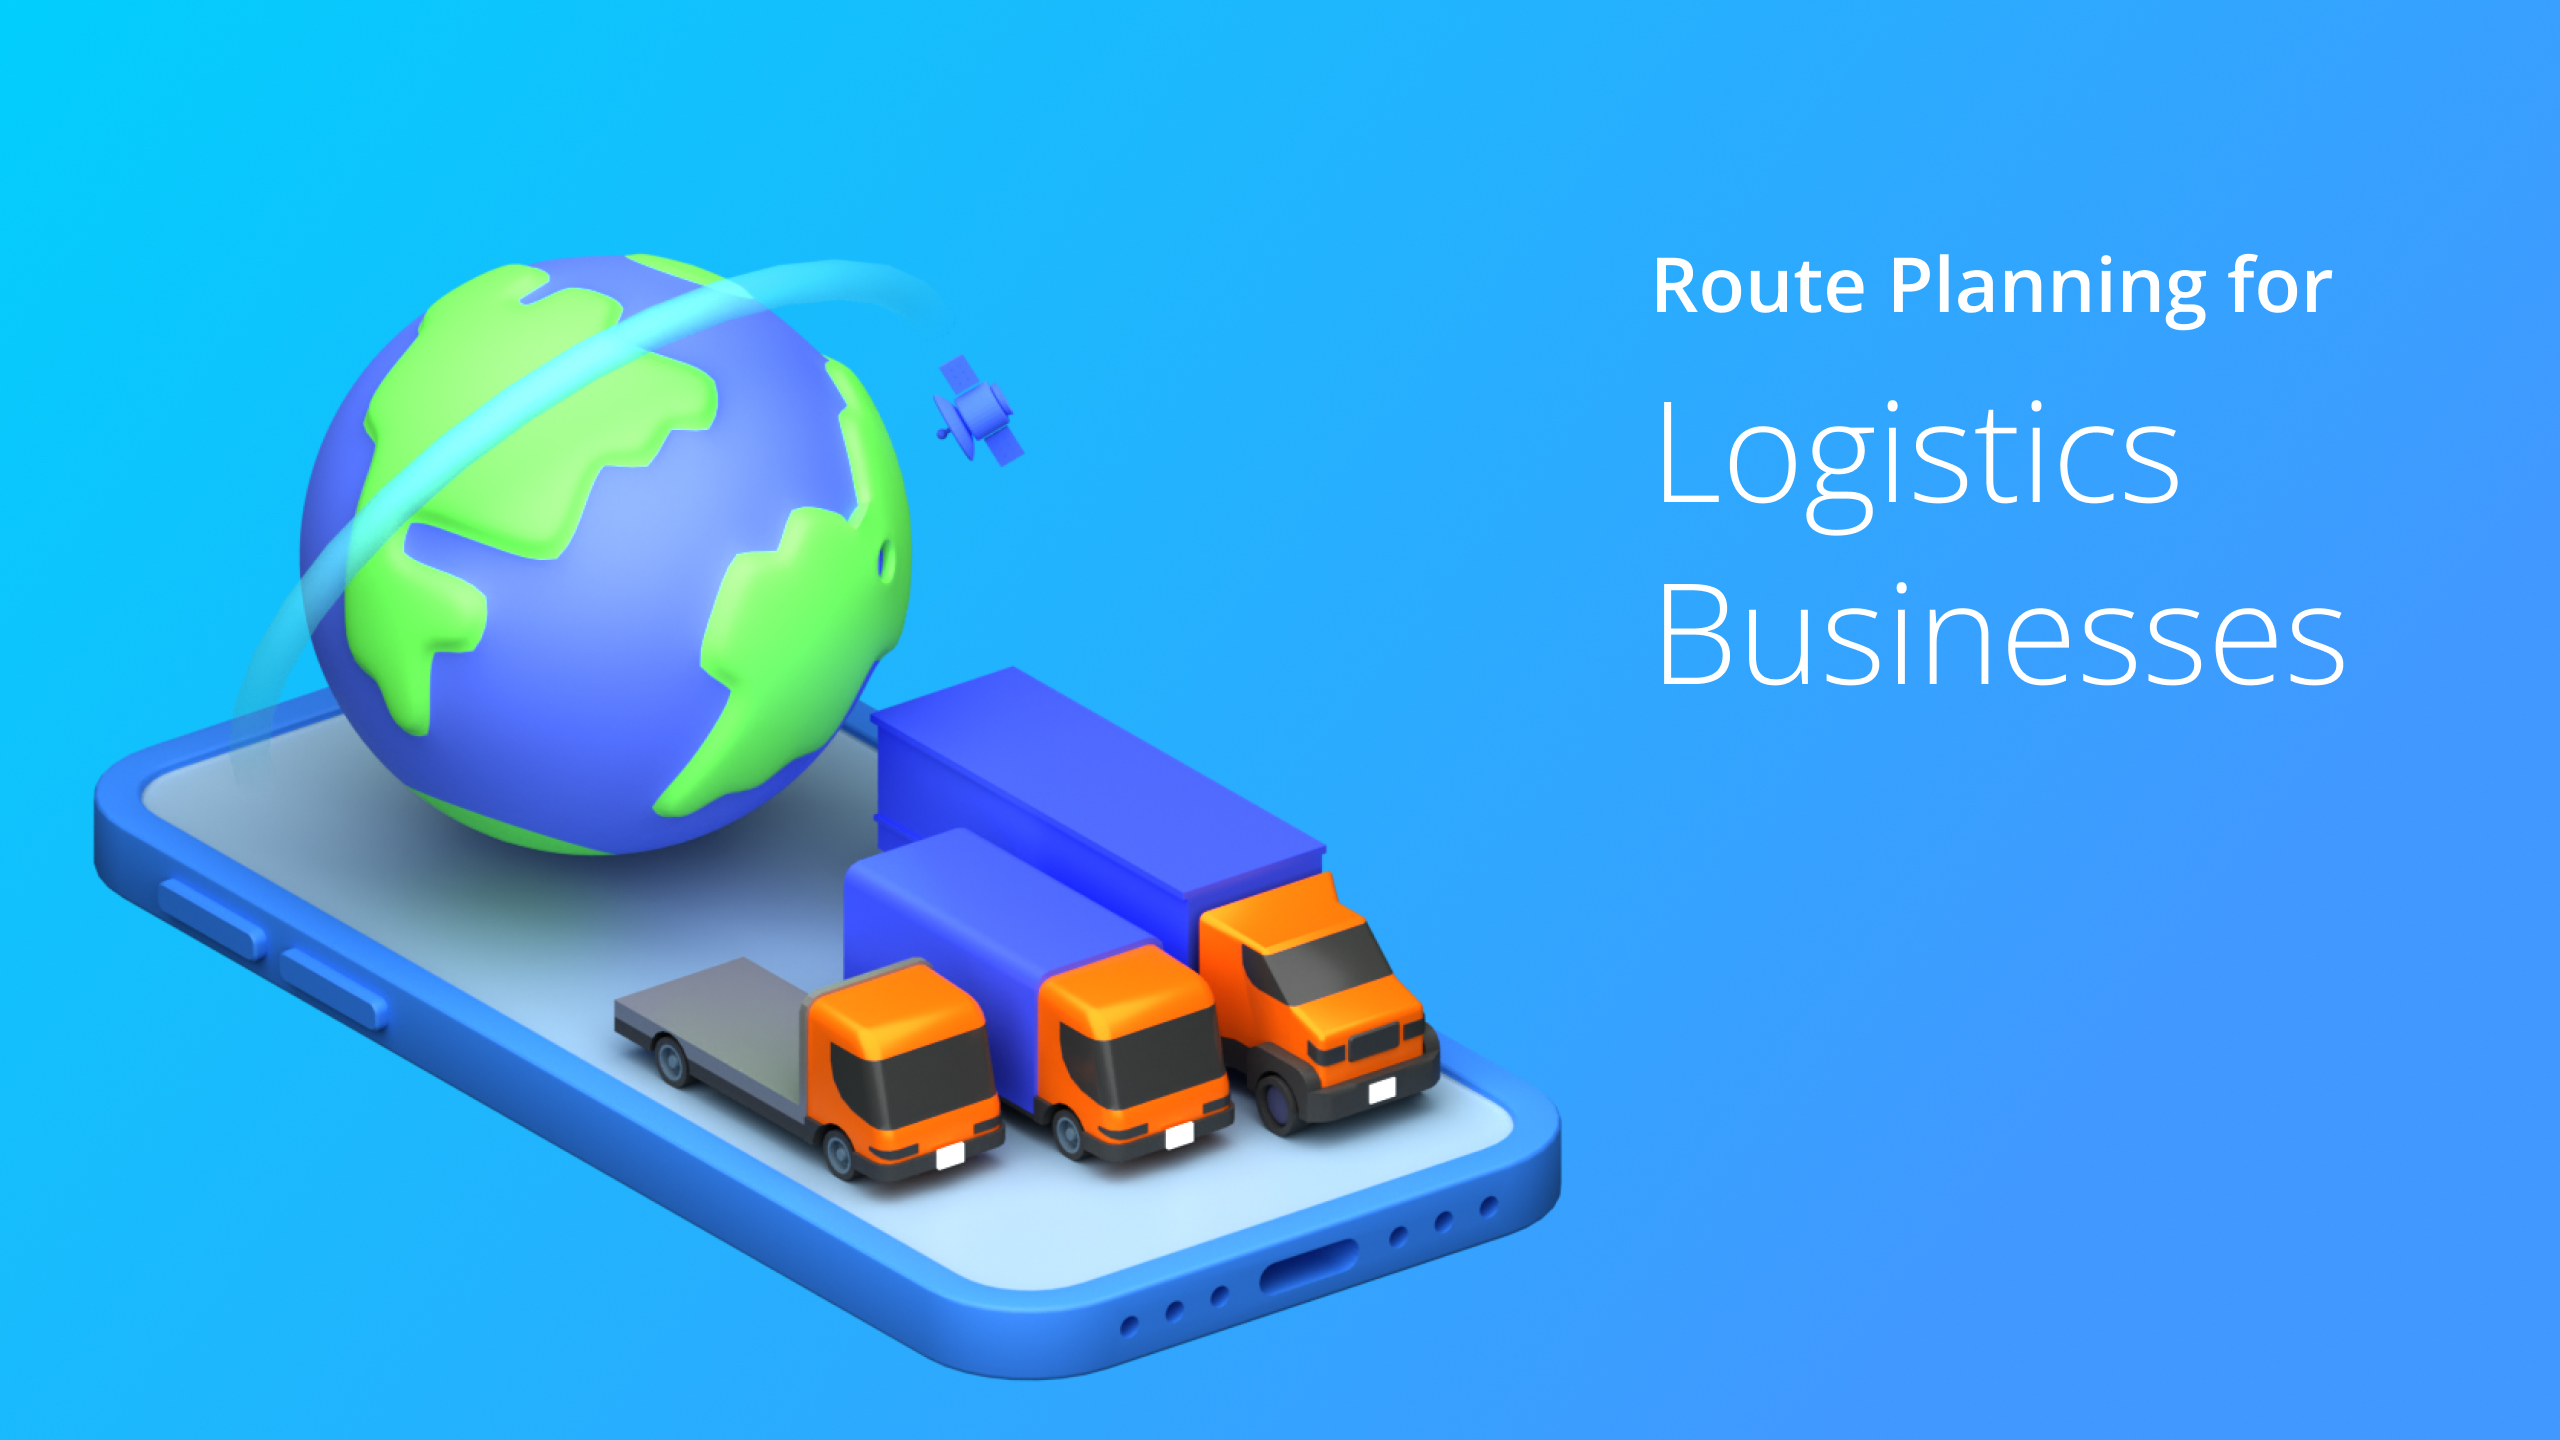 Custom Image - Route Planning for Logistics Businesses